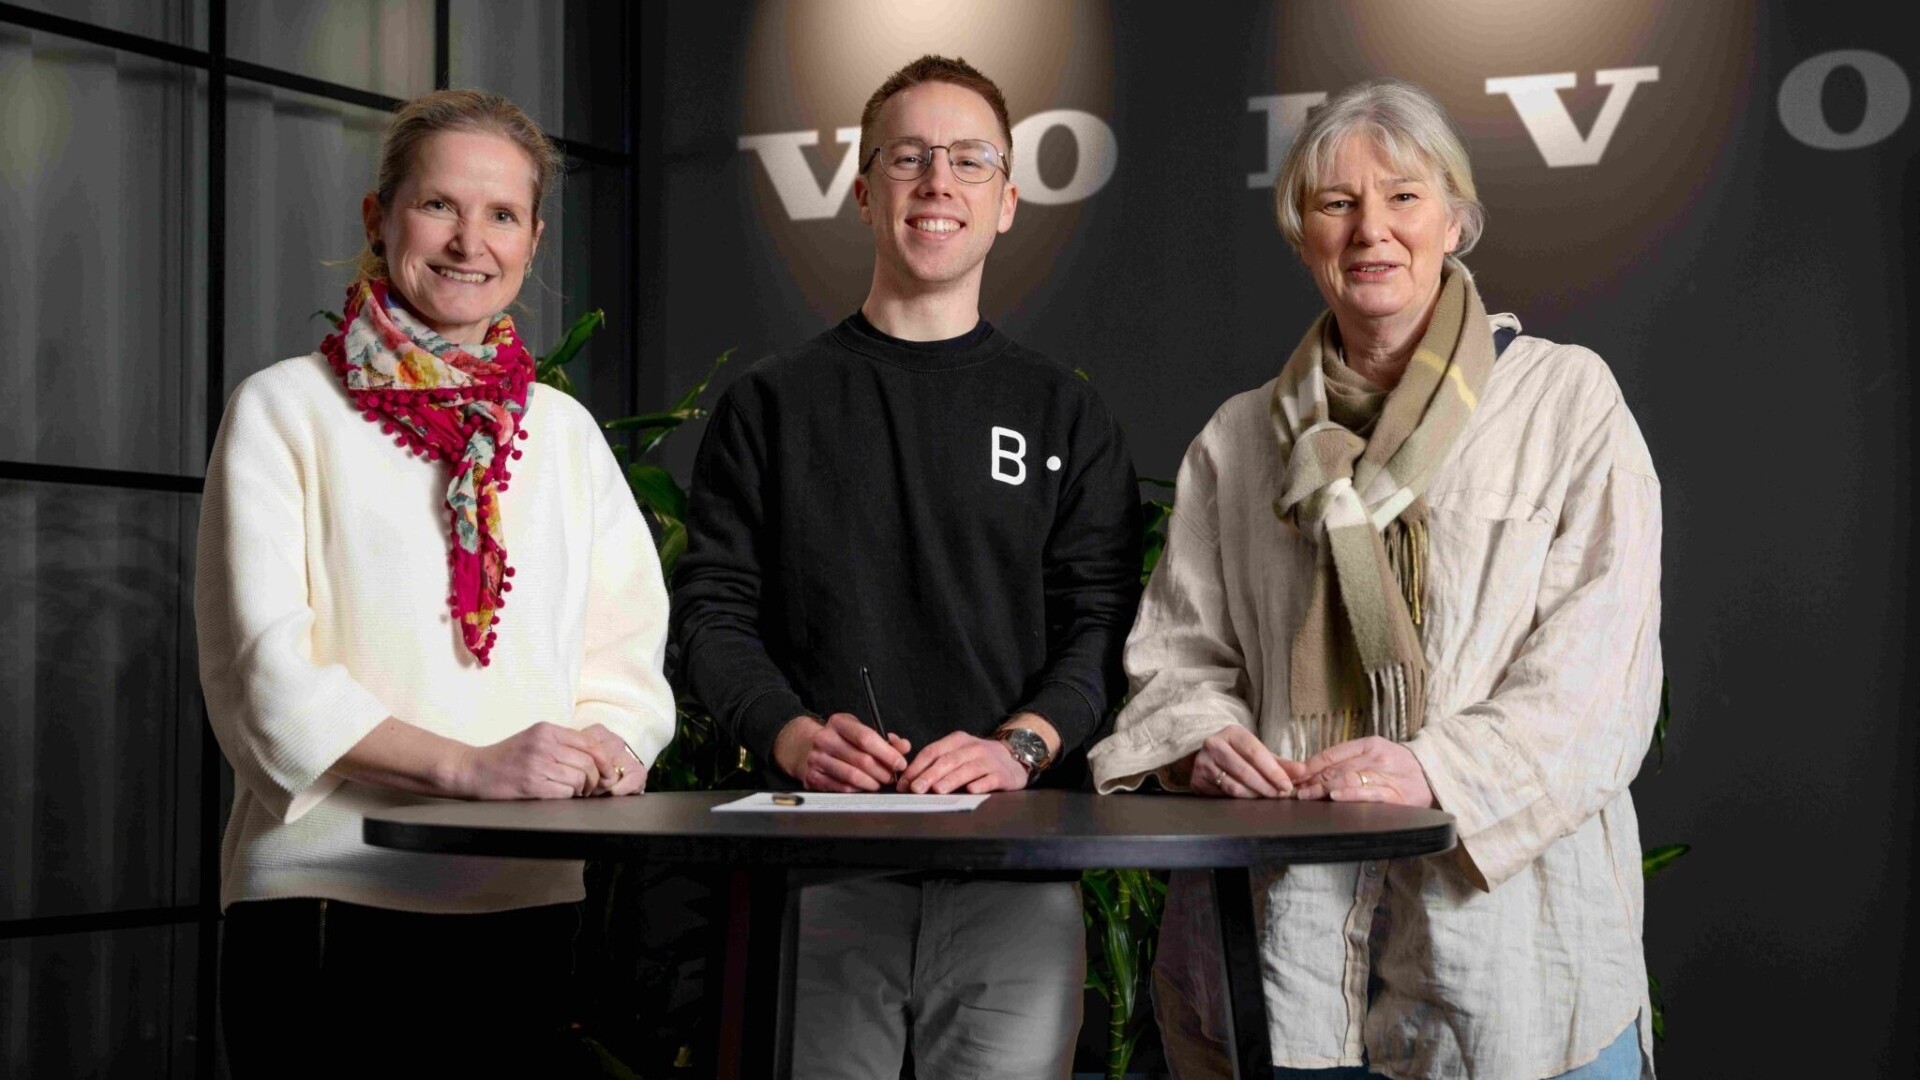 CEO Of Volvo Cars Tech Fund Ann-Sofie Ekberg (Left), CEO of Breathe Dr. Ian Campbell (Middle), And Vice President Of Propulsion & Energy at Volvo Cars Karin Thorn (Right)